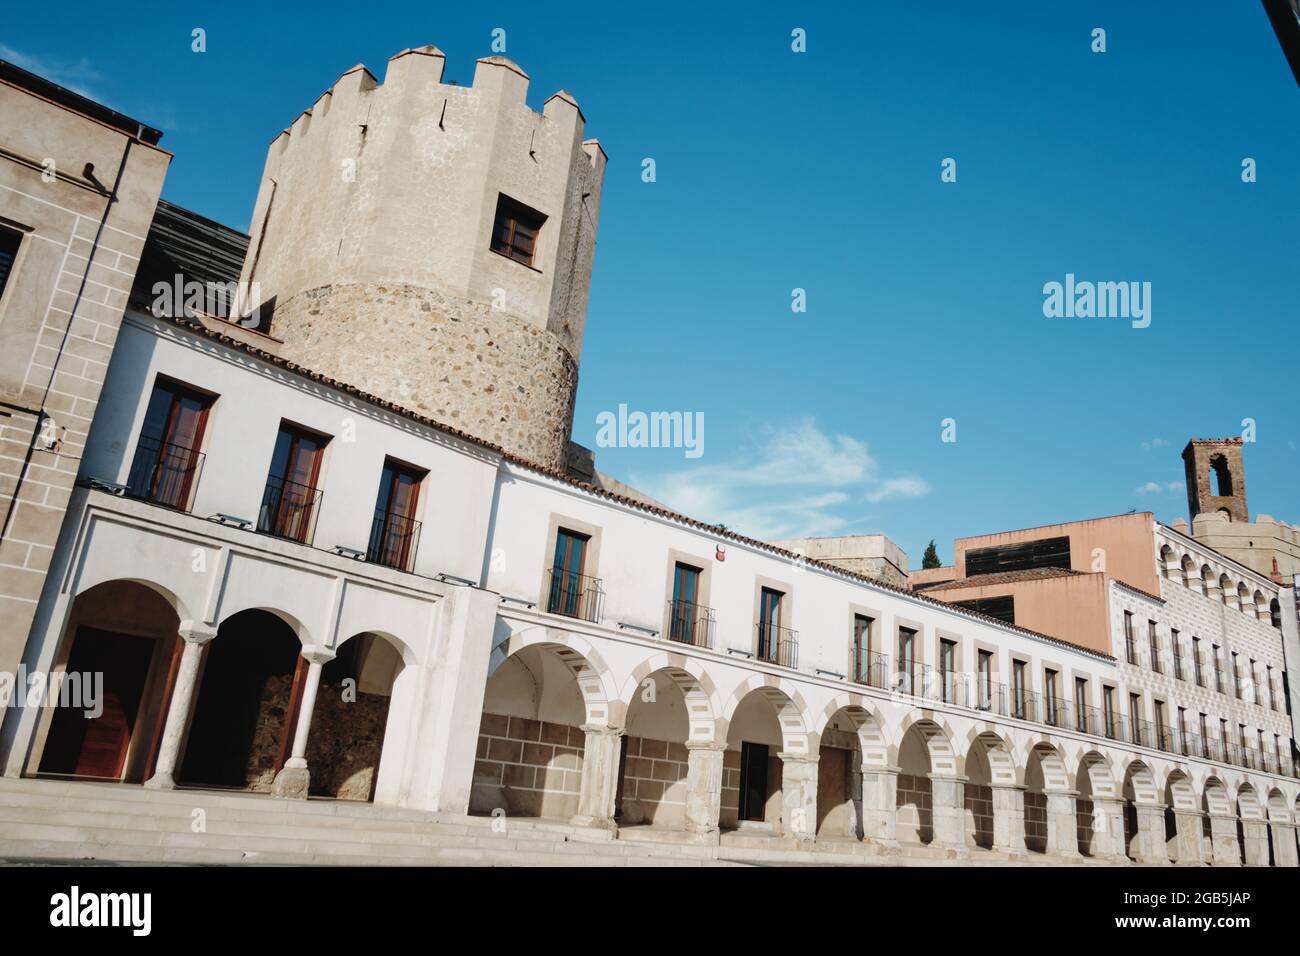 The Plaza Alta de Badajoz (Spain) was for centuries the center of the city, since it exceeded the limits of the Muslim citadel. Before it was known as Stock Photo